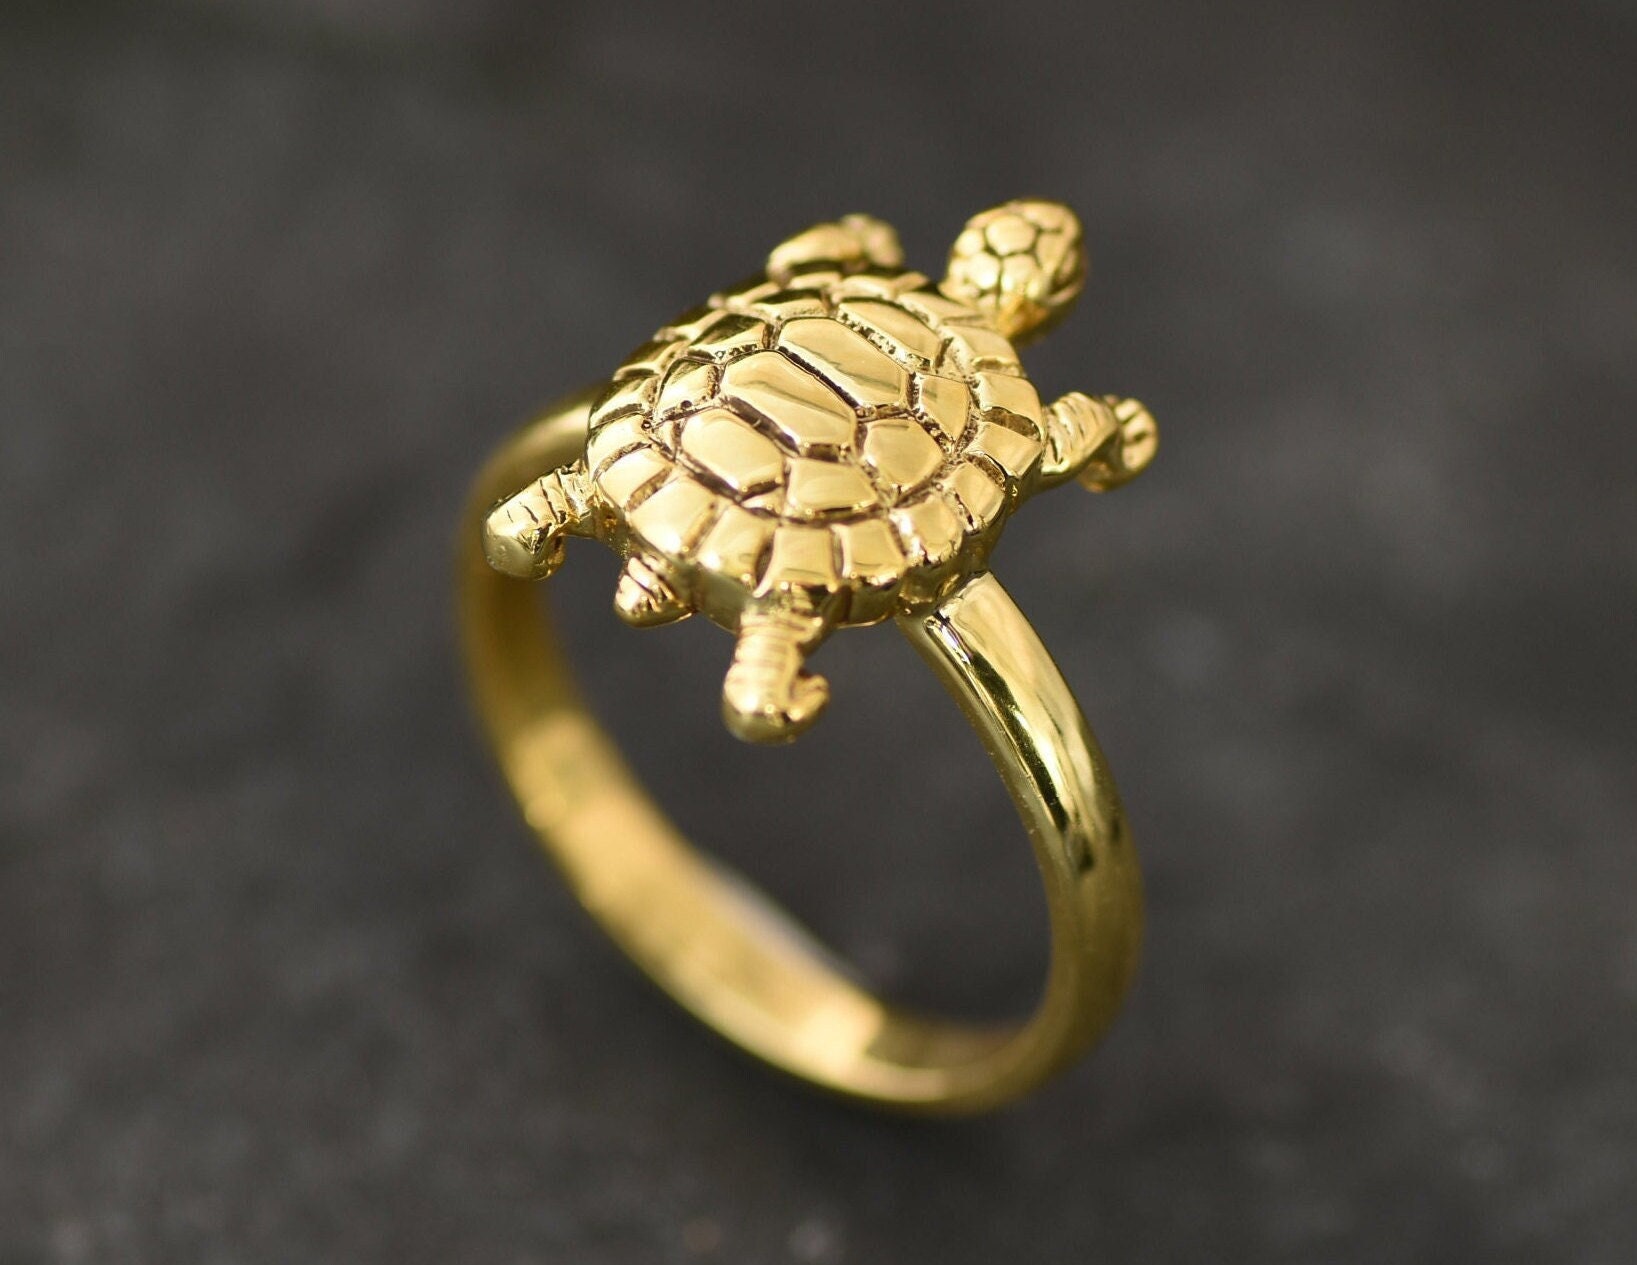 Shree Shyam Gems and Jewellery Panchdhatu Zircon Studded Tortoise Turtle  Meru Ring Adjustable Gold Plated for Men and Women, Set of 2 : Amazon.in:  Fashion